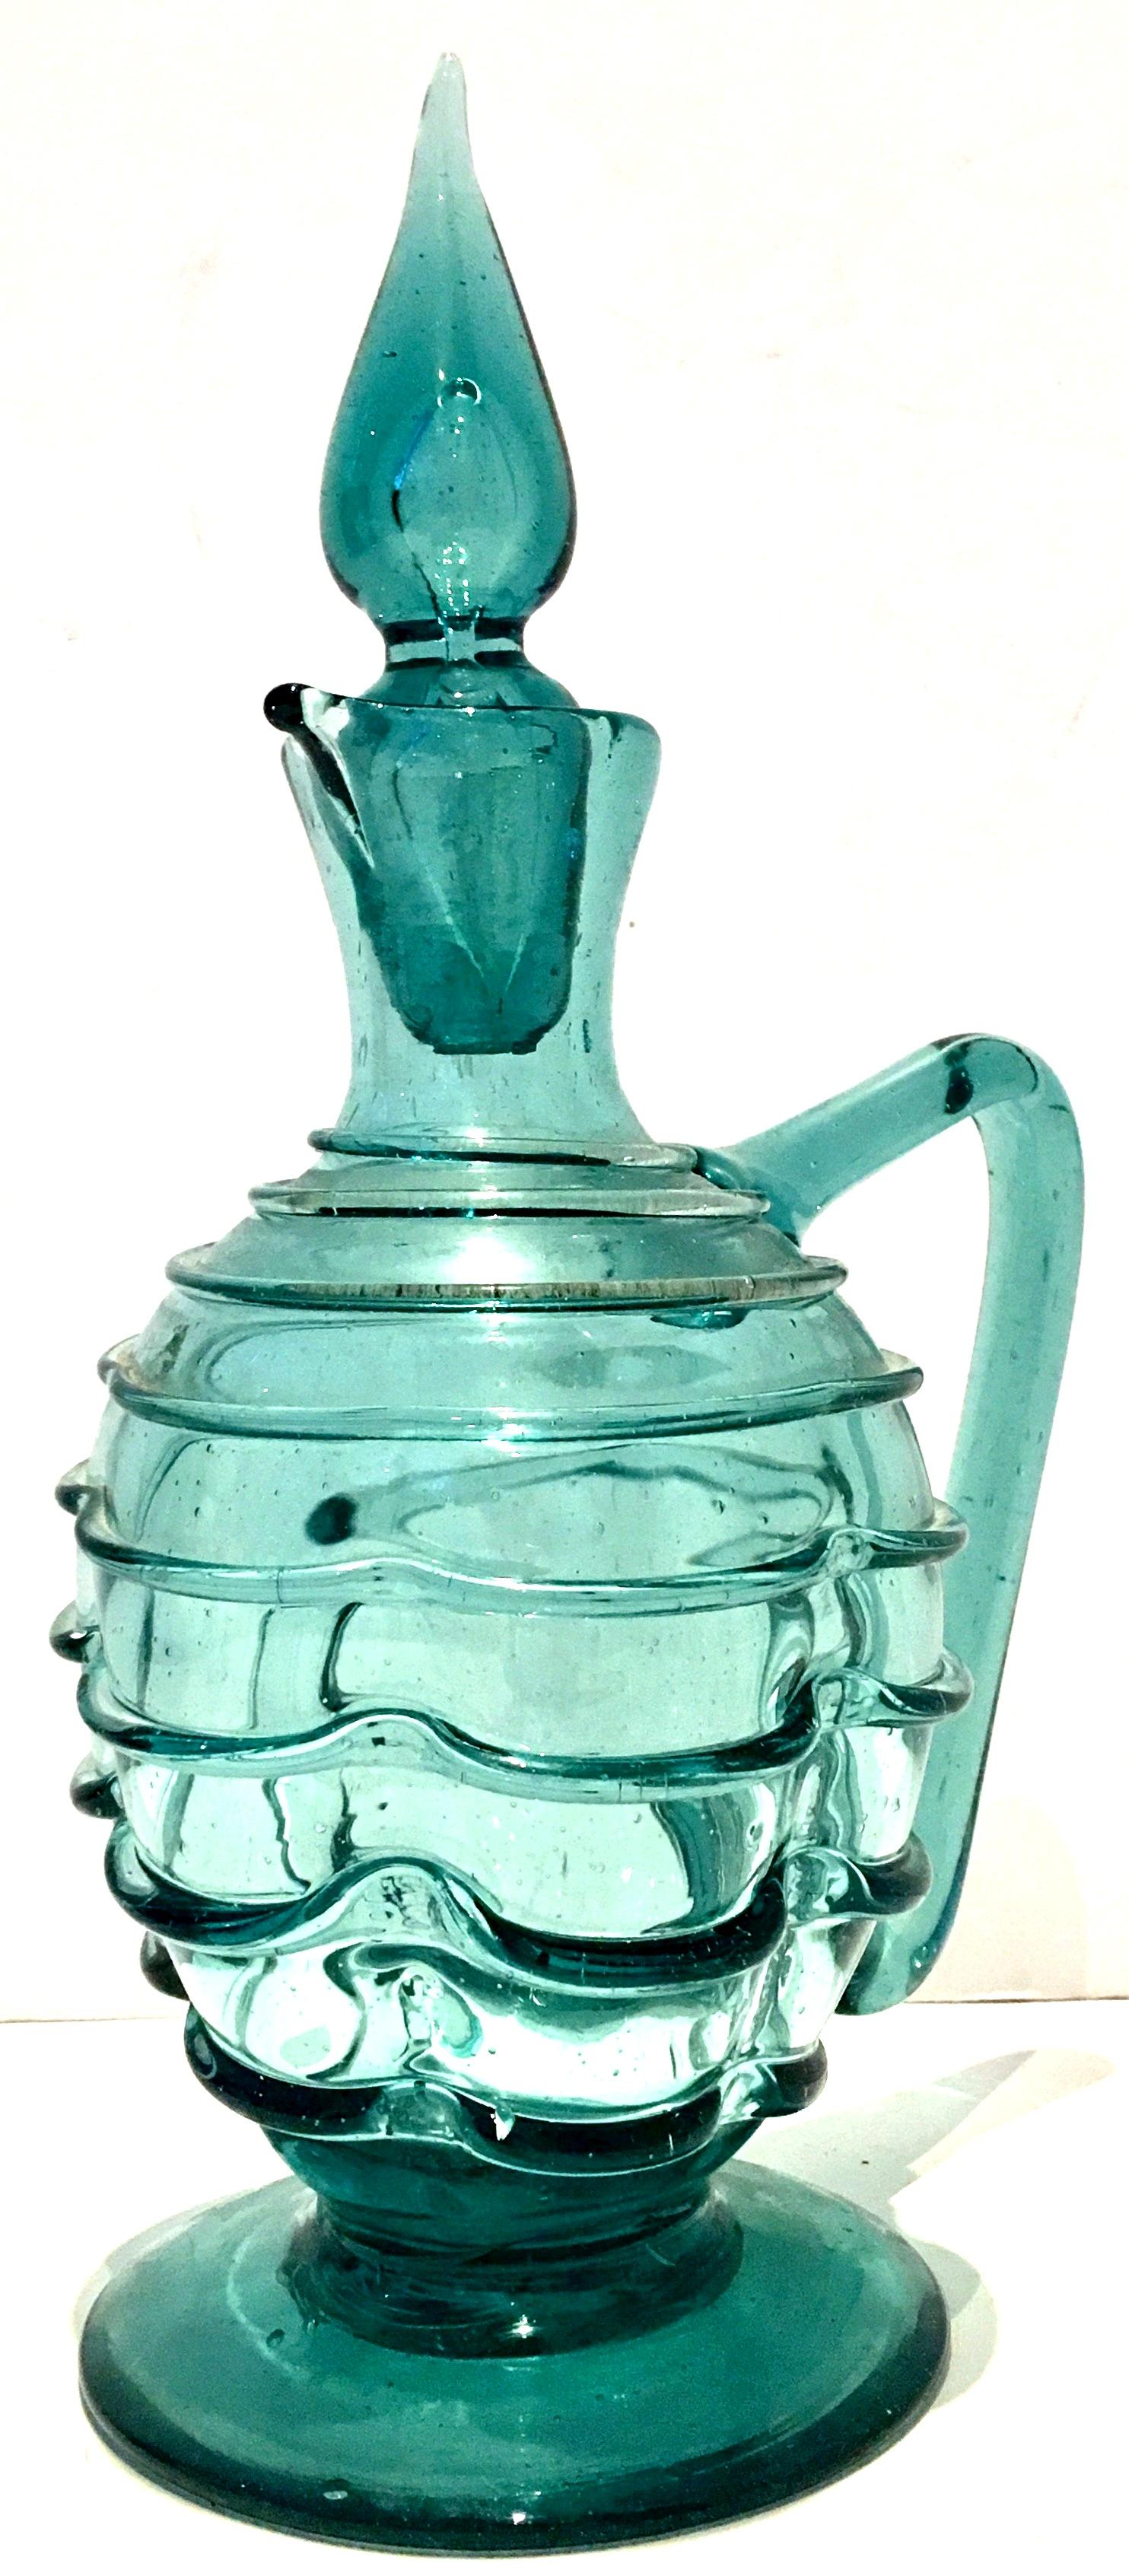 1950s American modern blown glass teal ribbed and footed decanter with genie style stopper.